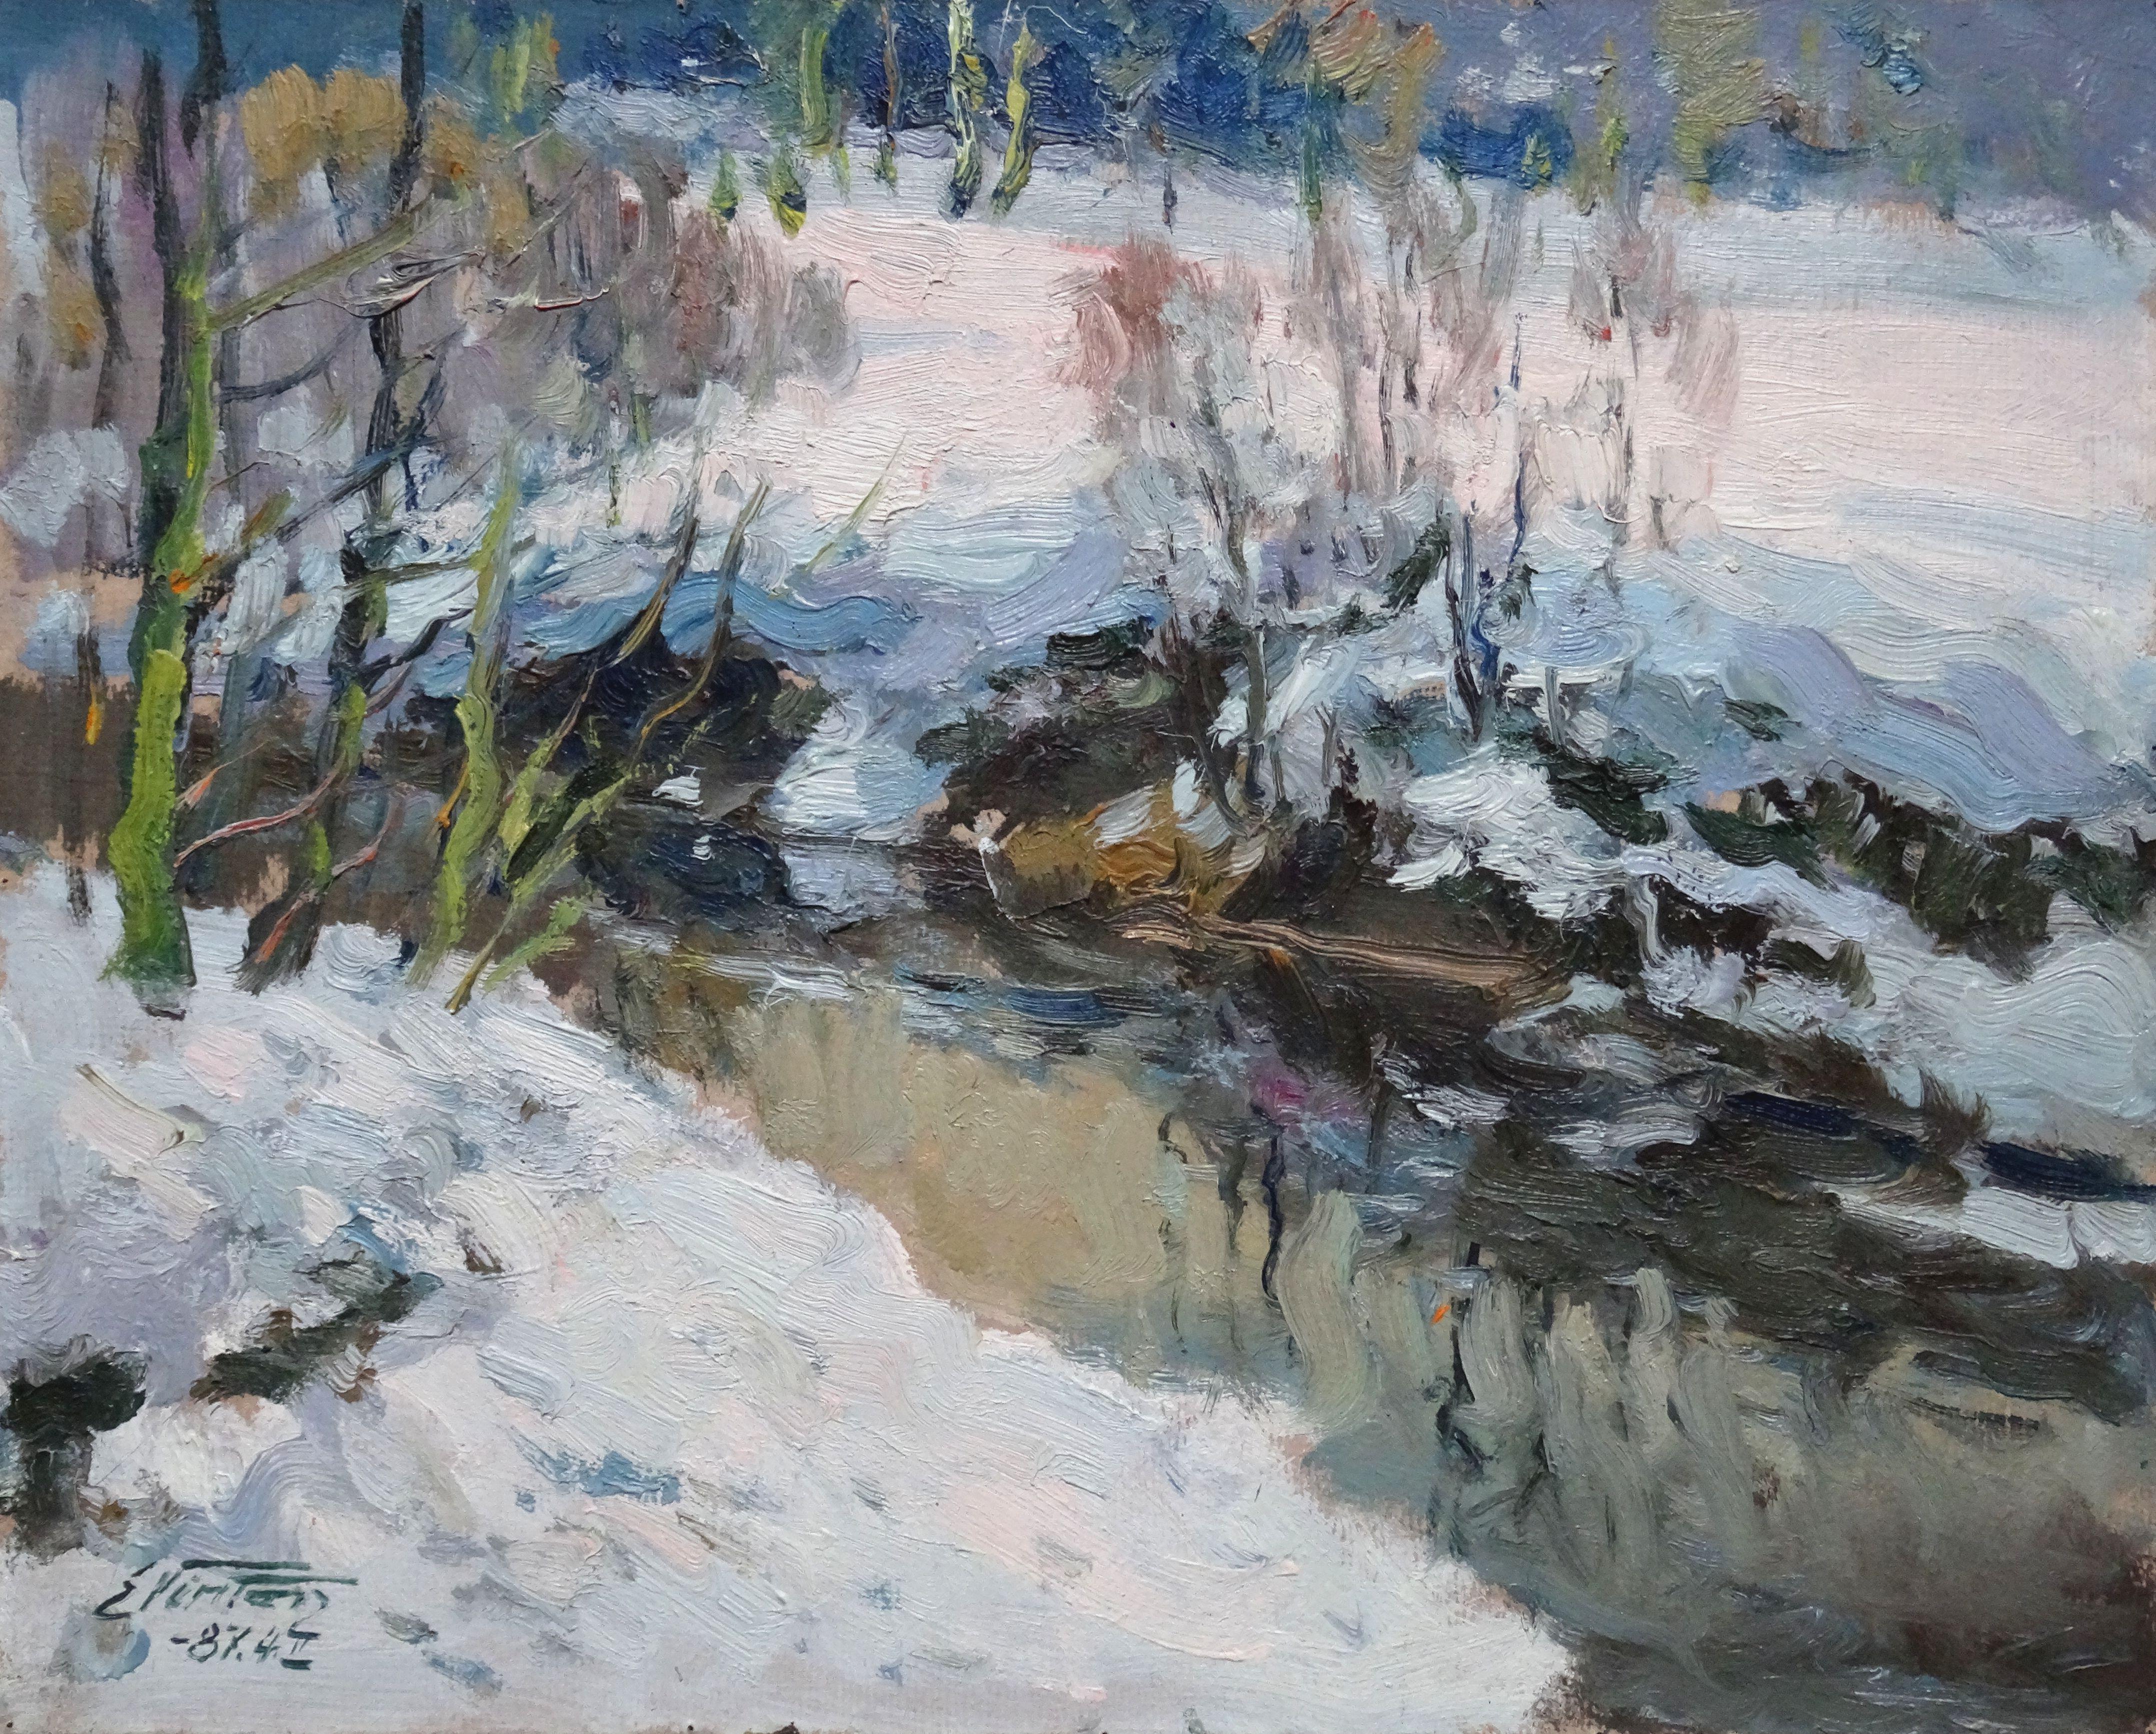 Edgars Vinters Landscape Painting - River in winter. 1987, oil on board, 40x50 cm